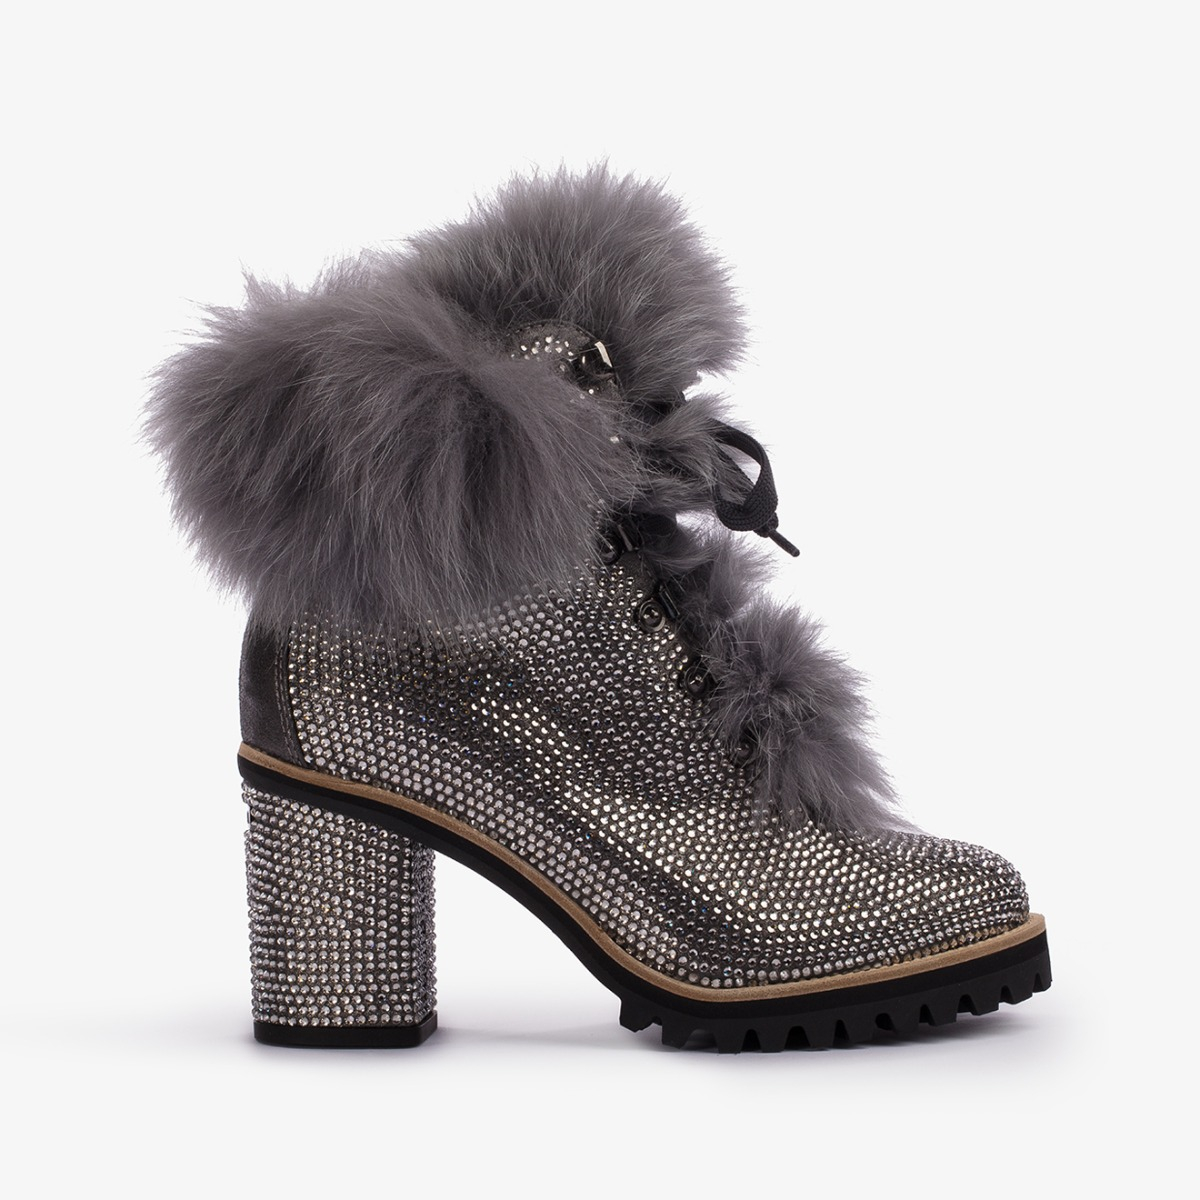 ST. MORITZ ANKLE BOOT 90 mm - Le Silla official outlet